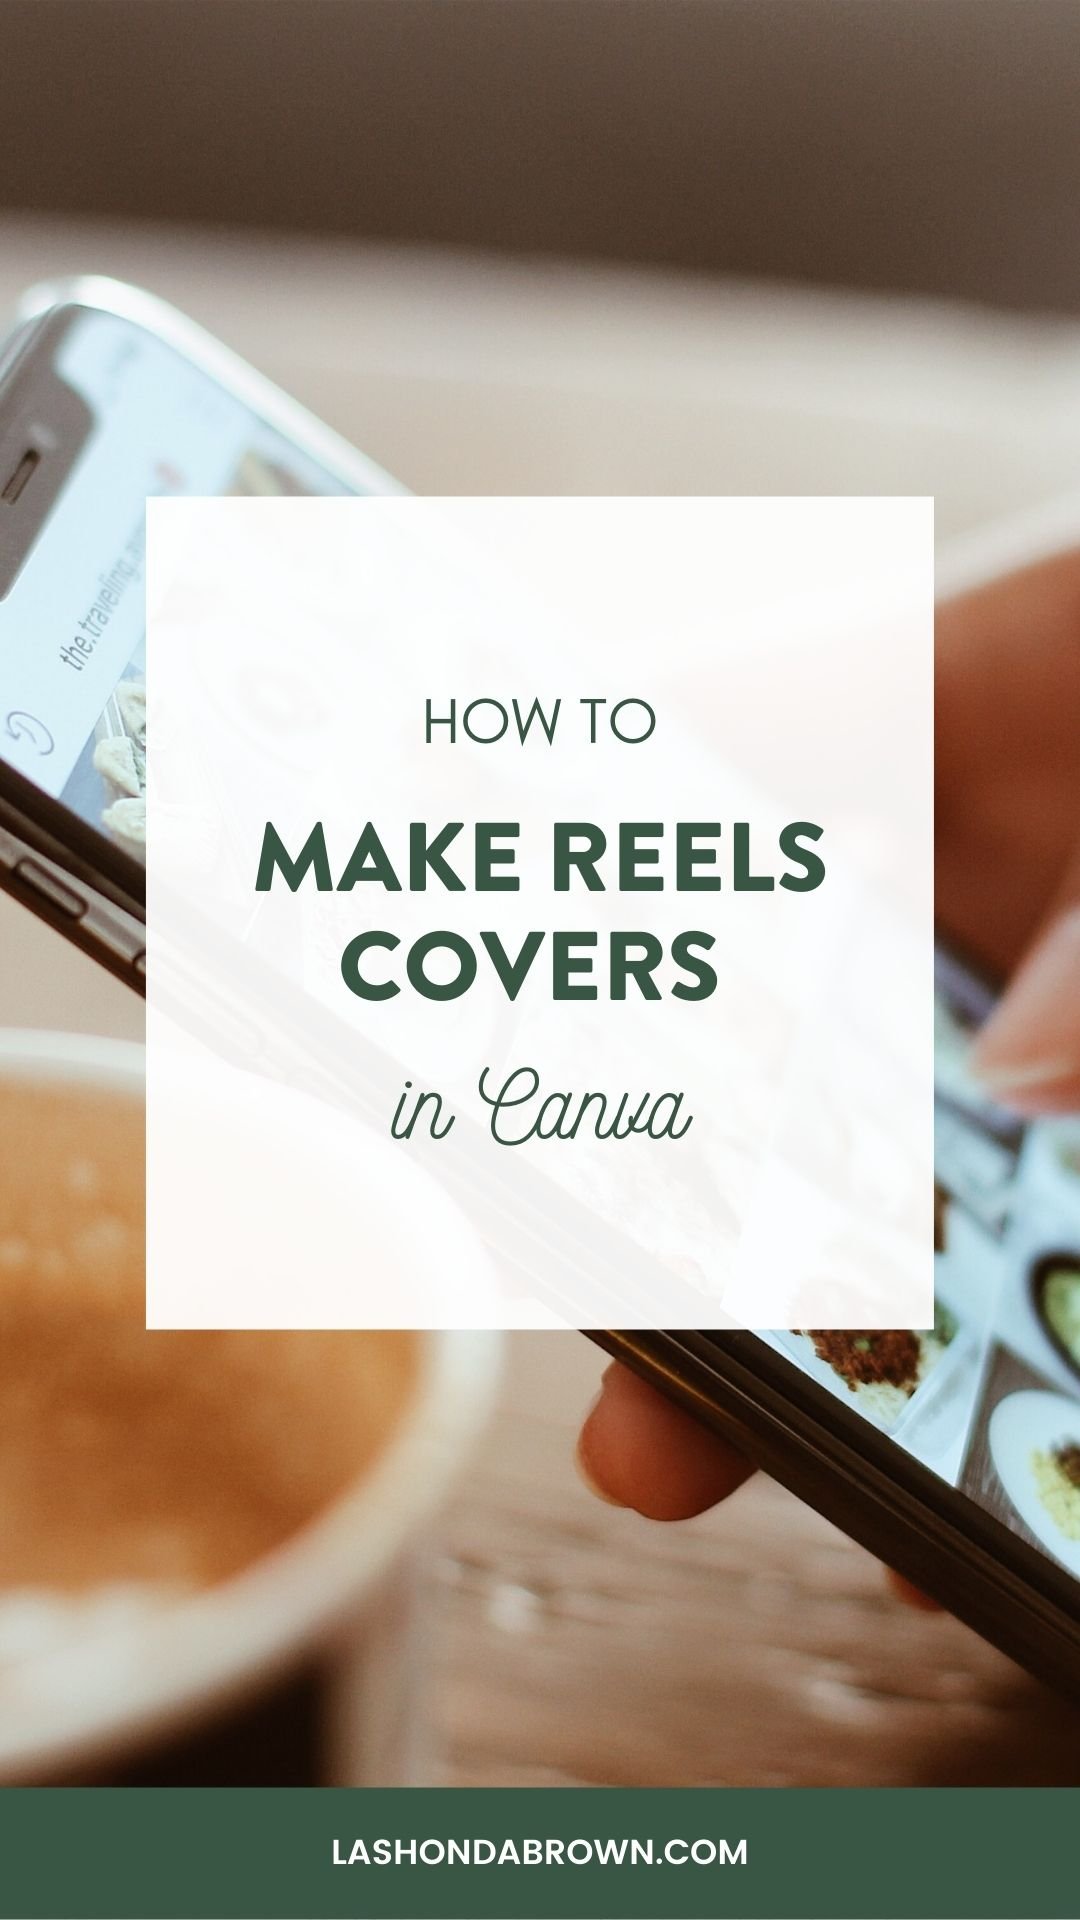 How to Make Reels Covers in Canva — Tech Educator,  Coach & Speaker